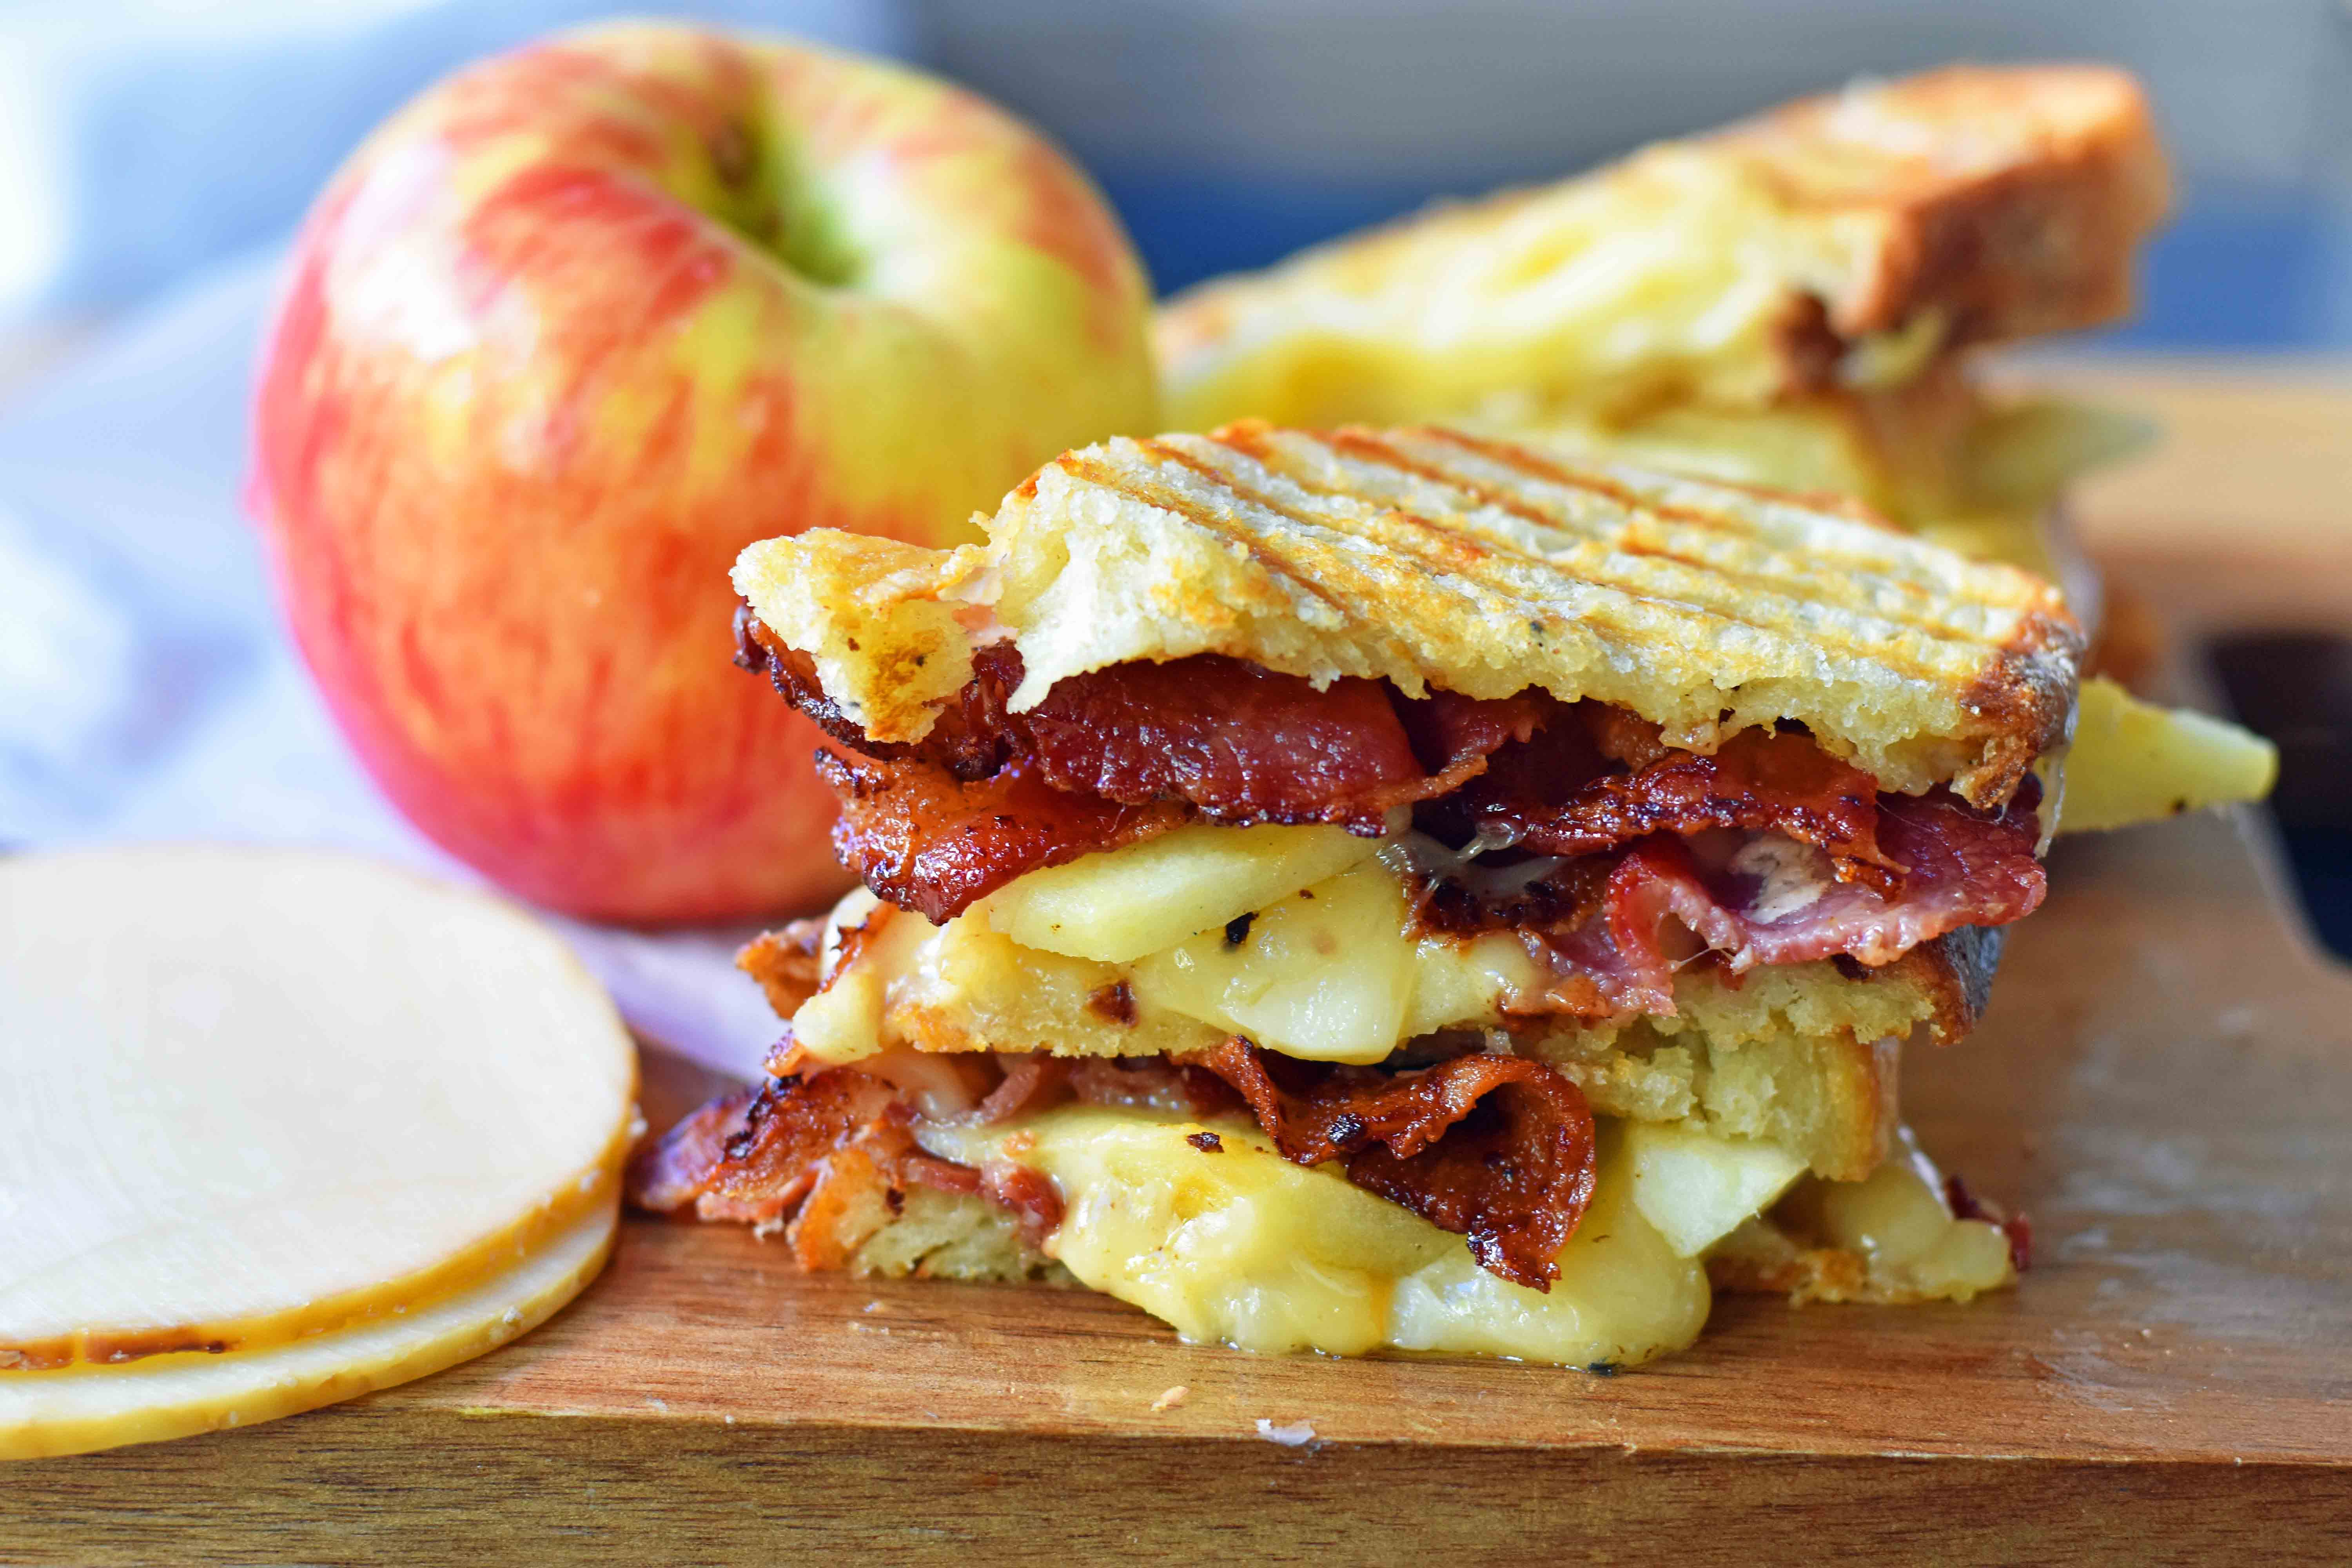 A gourmet grilled cheese sandwich made with smoked gouda cheese, sweet crisp Honeycrisp apple slices, and crispy bacon all on sourdough bread. How to make the perfect grilled cheese sandwich. Tips on how to make the best grilled cheese. www.modernhoney.com